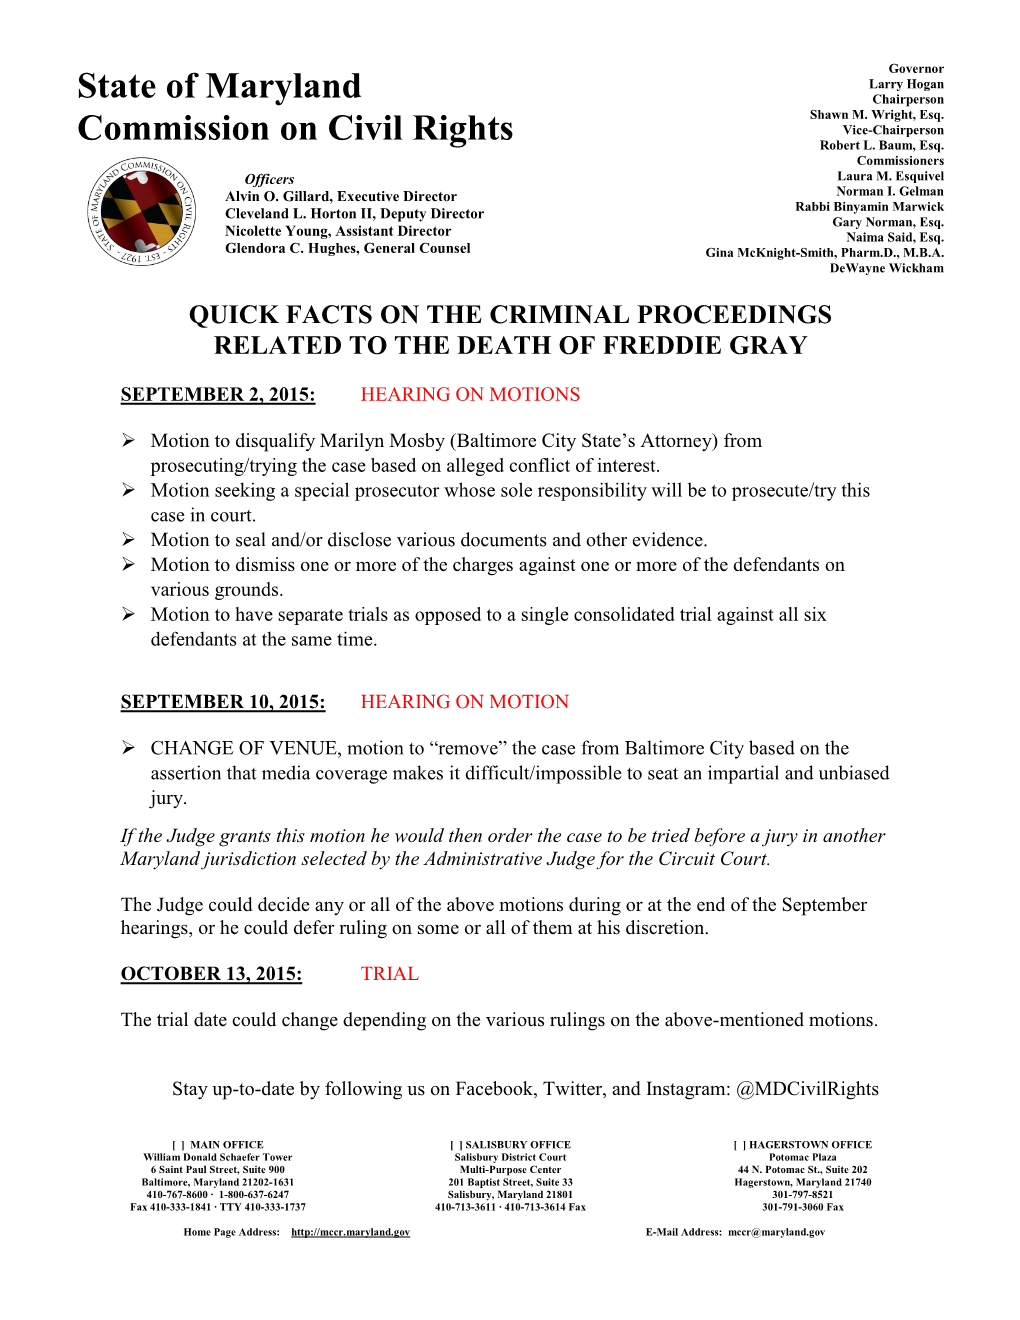 Quick Facts on the Criminal Proceedings Related to the Death of Freddie Gray